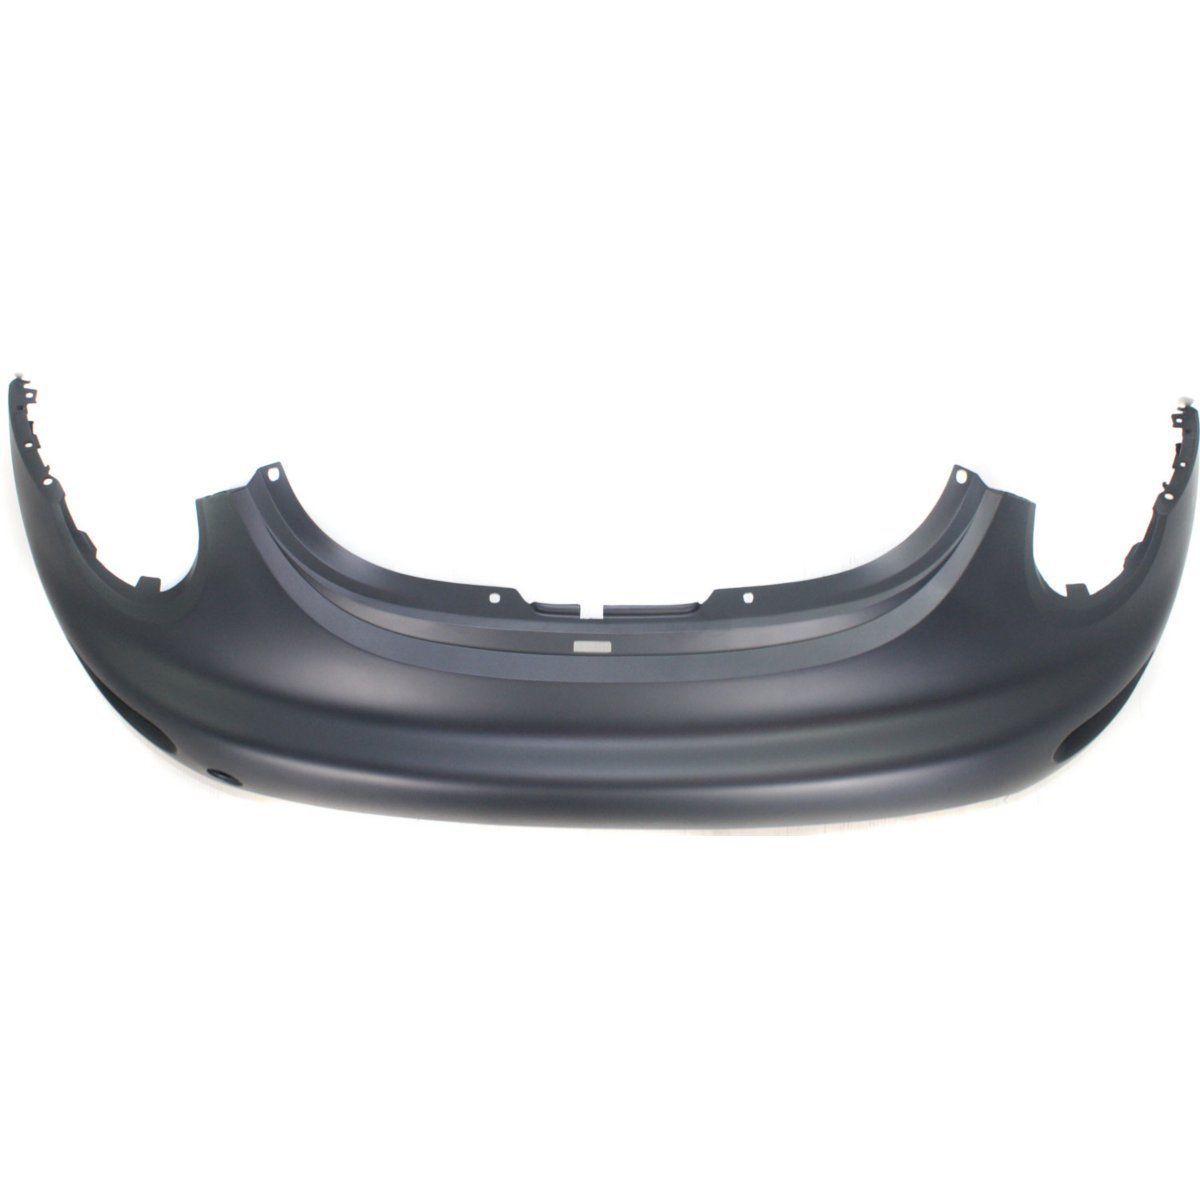 1998-1998 VOLKSWAGEN BEETLE Front Bumper Cover Painted to Match